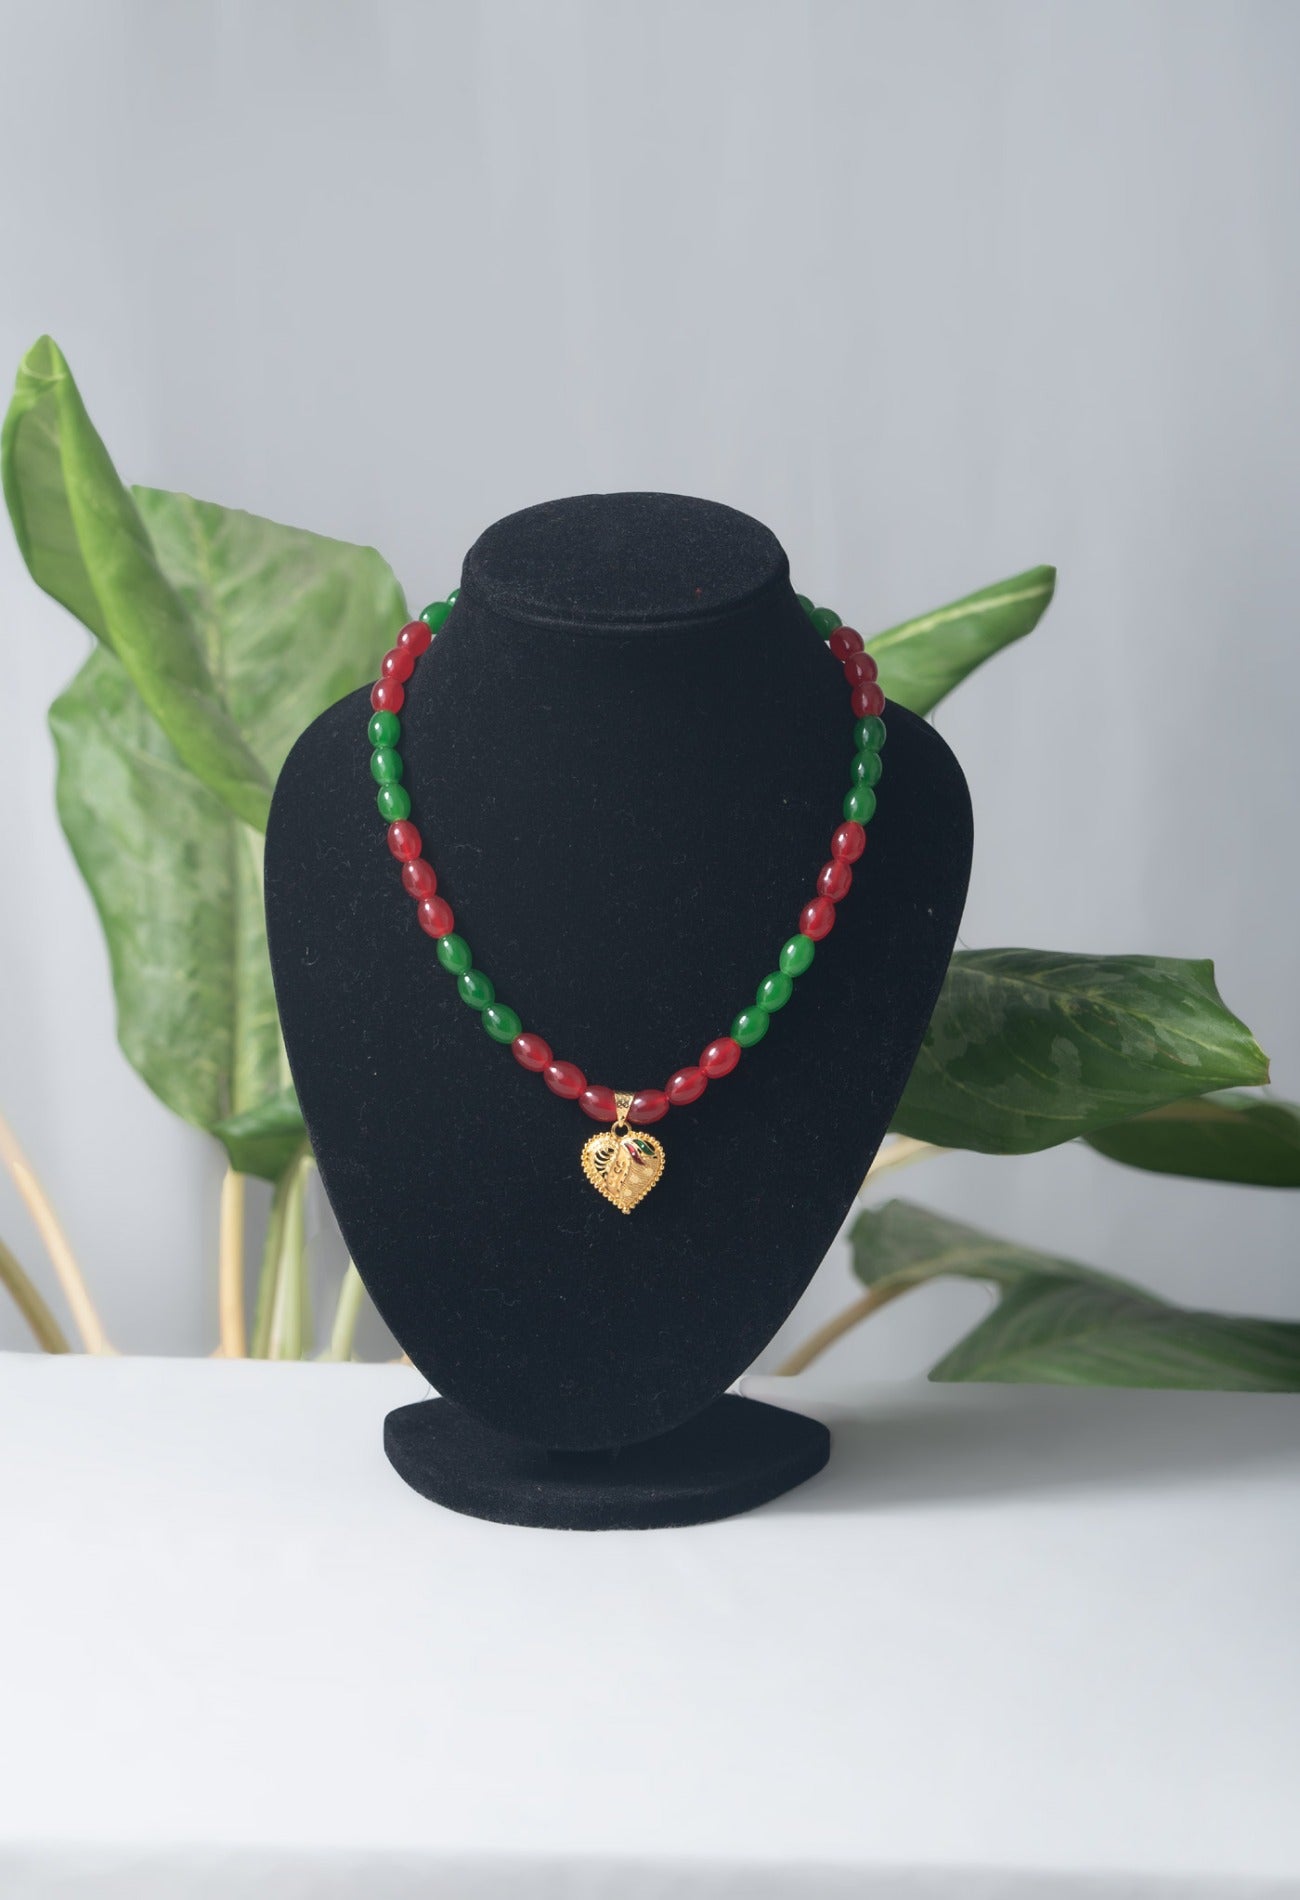 Online Shopping for Red and Green Amravati Round Beads Necklace with Pendent with jewellery from Andhra pradesh at Unnatisilks.com India
